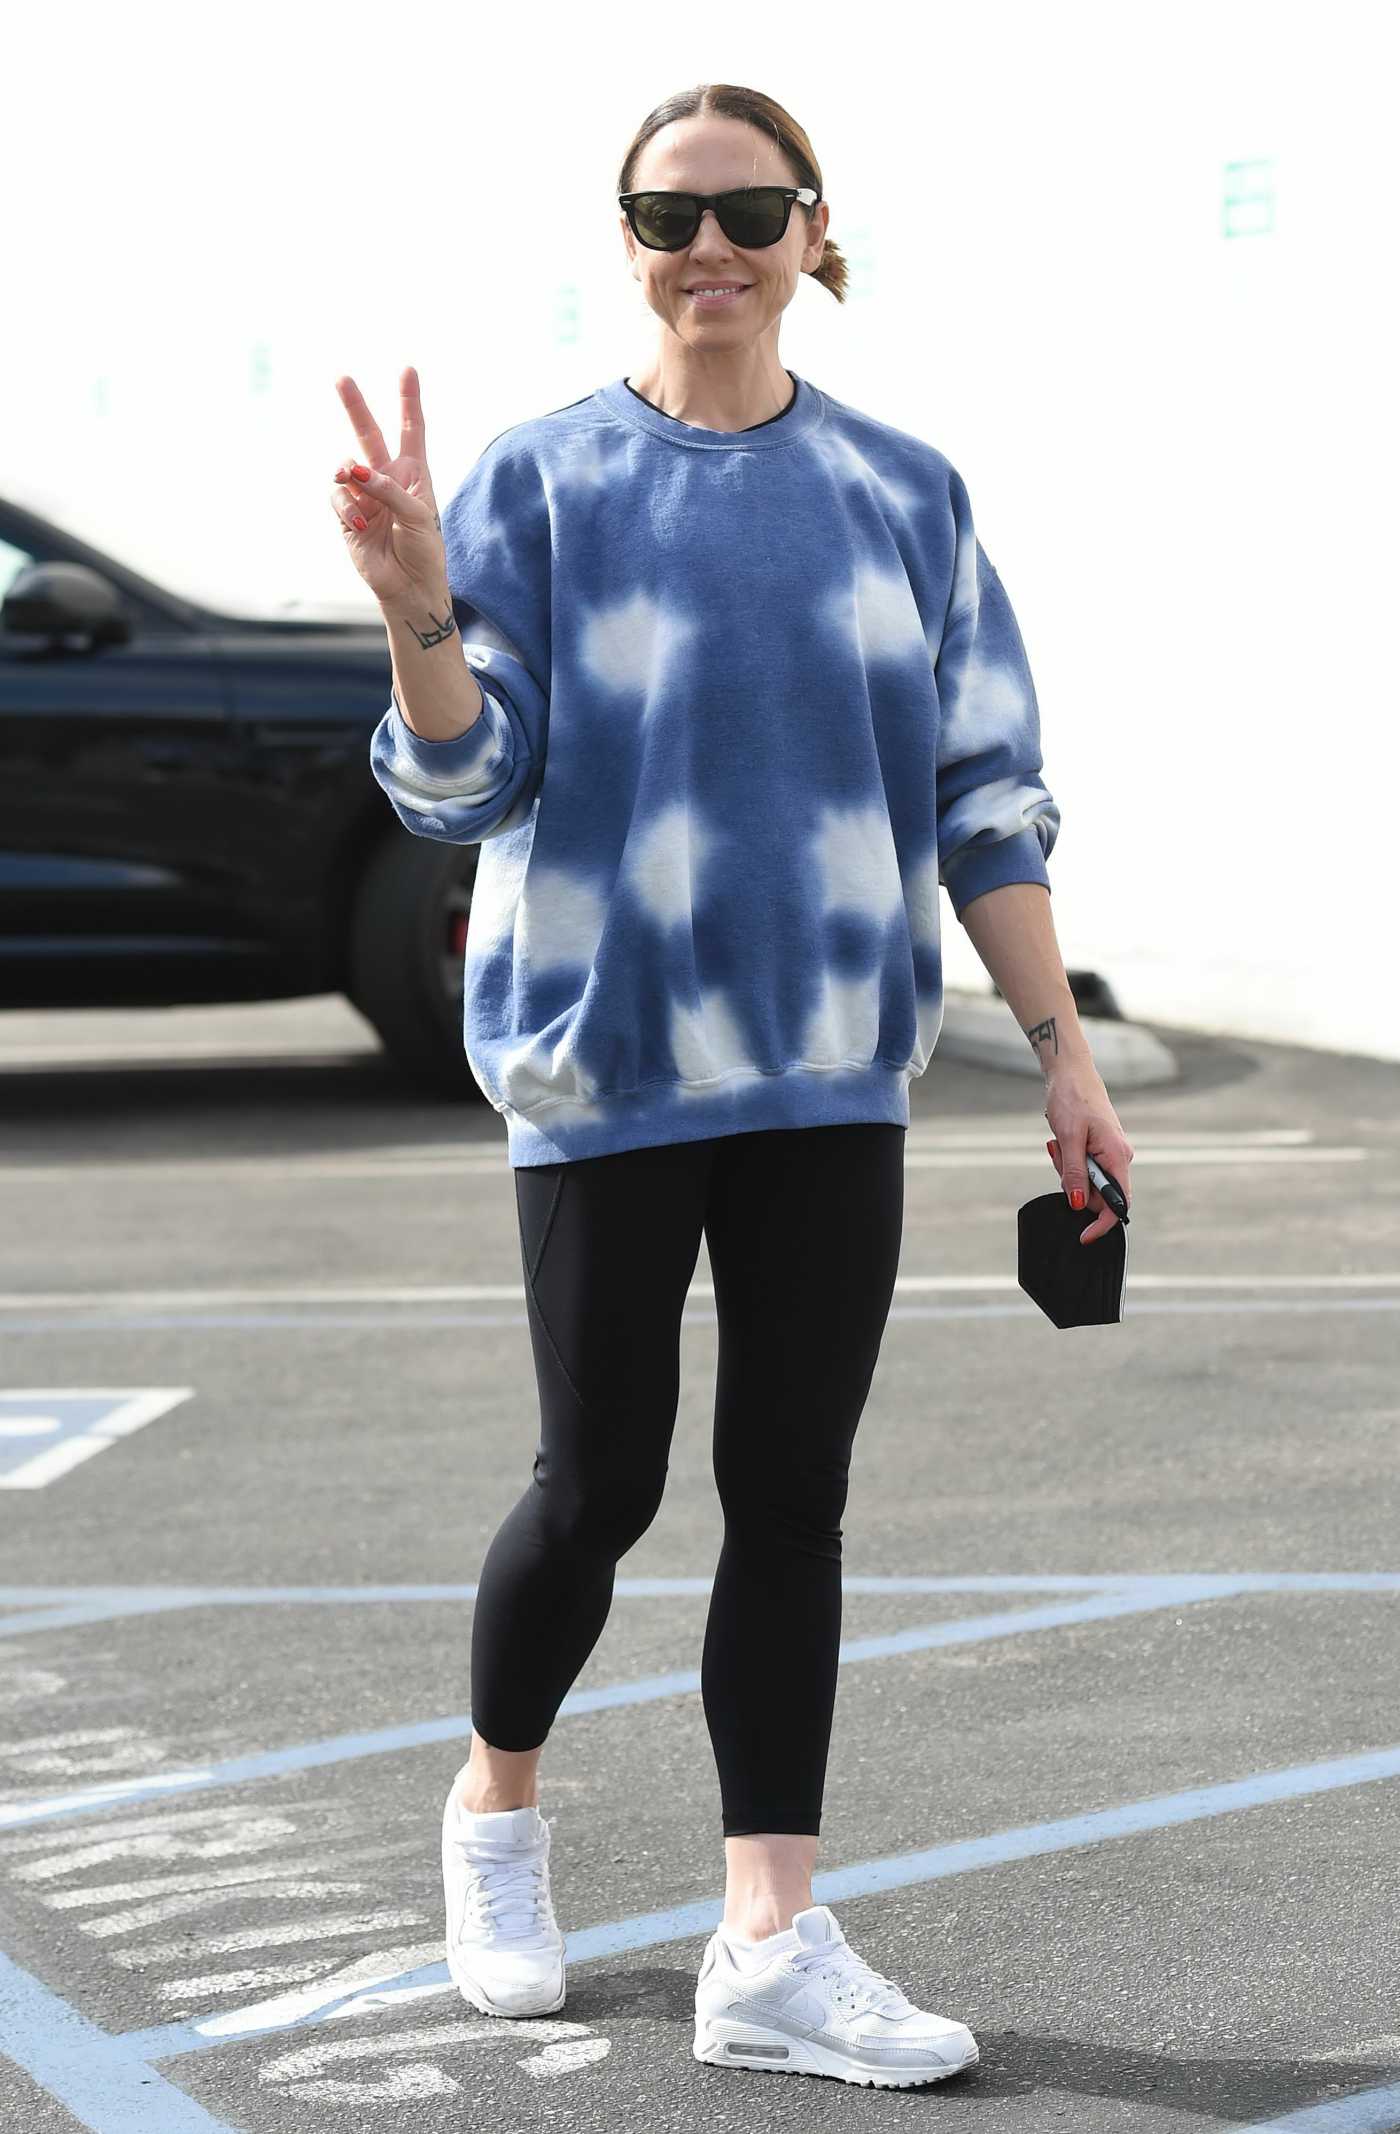 Melanie Chisholm in a White Sneakers Arrives at The Dancing with the Stars Show Rehearsals in Los Angeles CA 10/08/2021